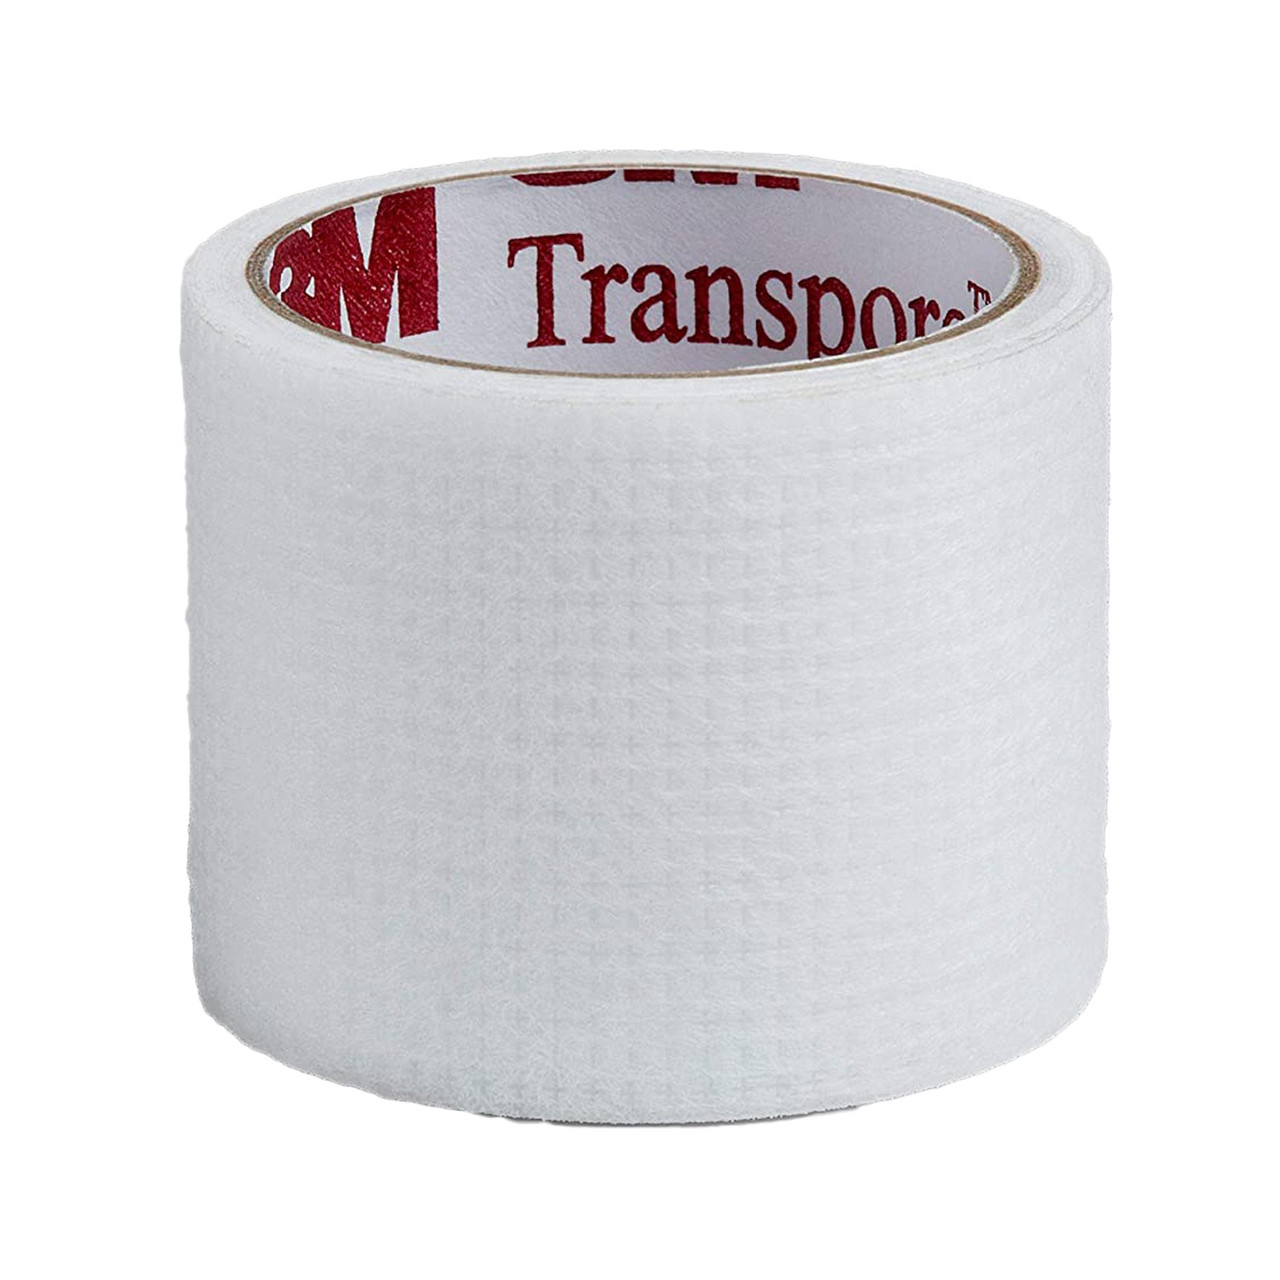 3M-1527-3 Transpore Surgical Tape 3 x 10 yards - Box of 4 Rolls